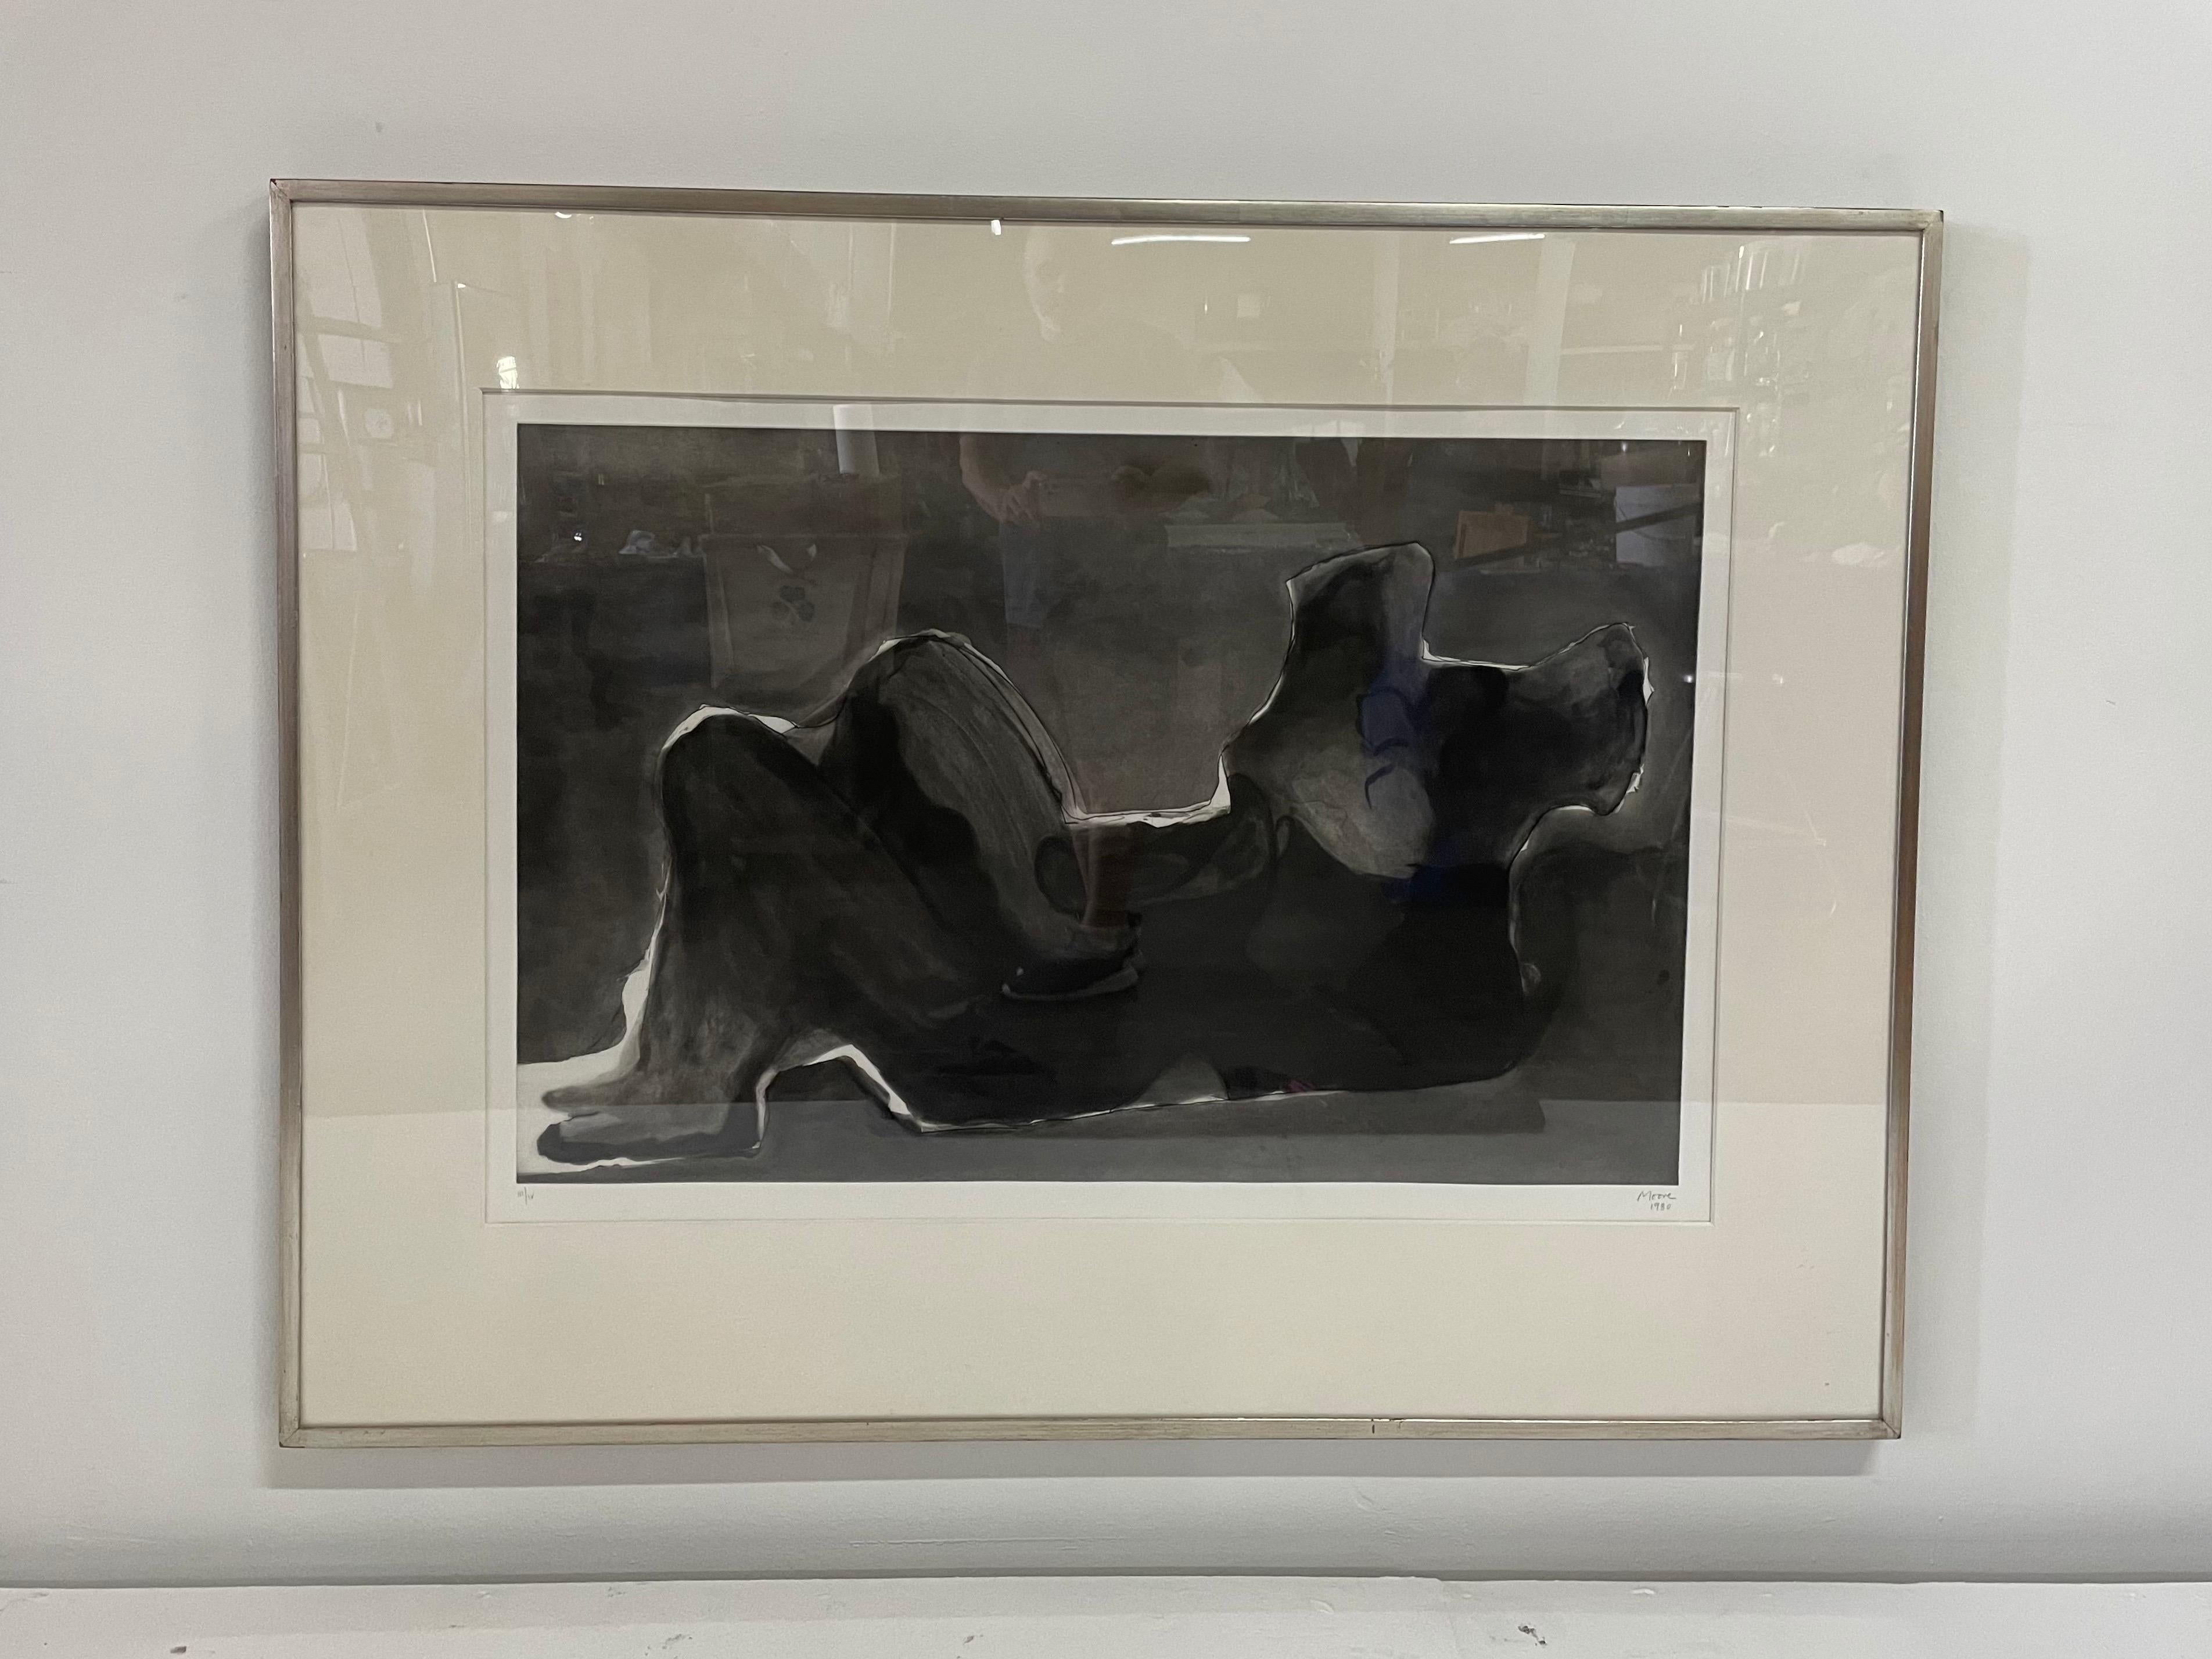 This framed signed and numbered aquatint etching by Henry Moore (1831-1895), framed in a simple silver leaf and acrylic frame. 1979-80 Etching, aquatint and drypoint, on Magnani paper, with full margins. Signed, dated `1980' and numbered III/IV.